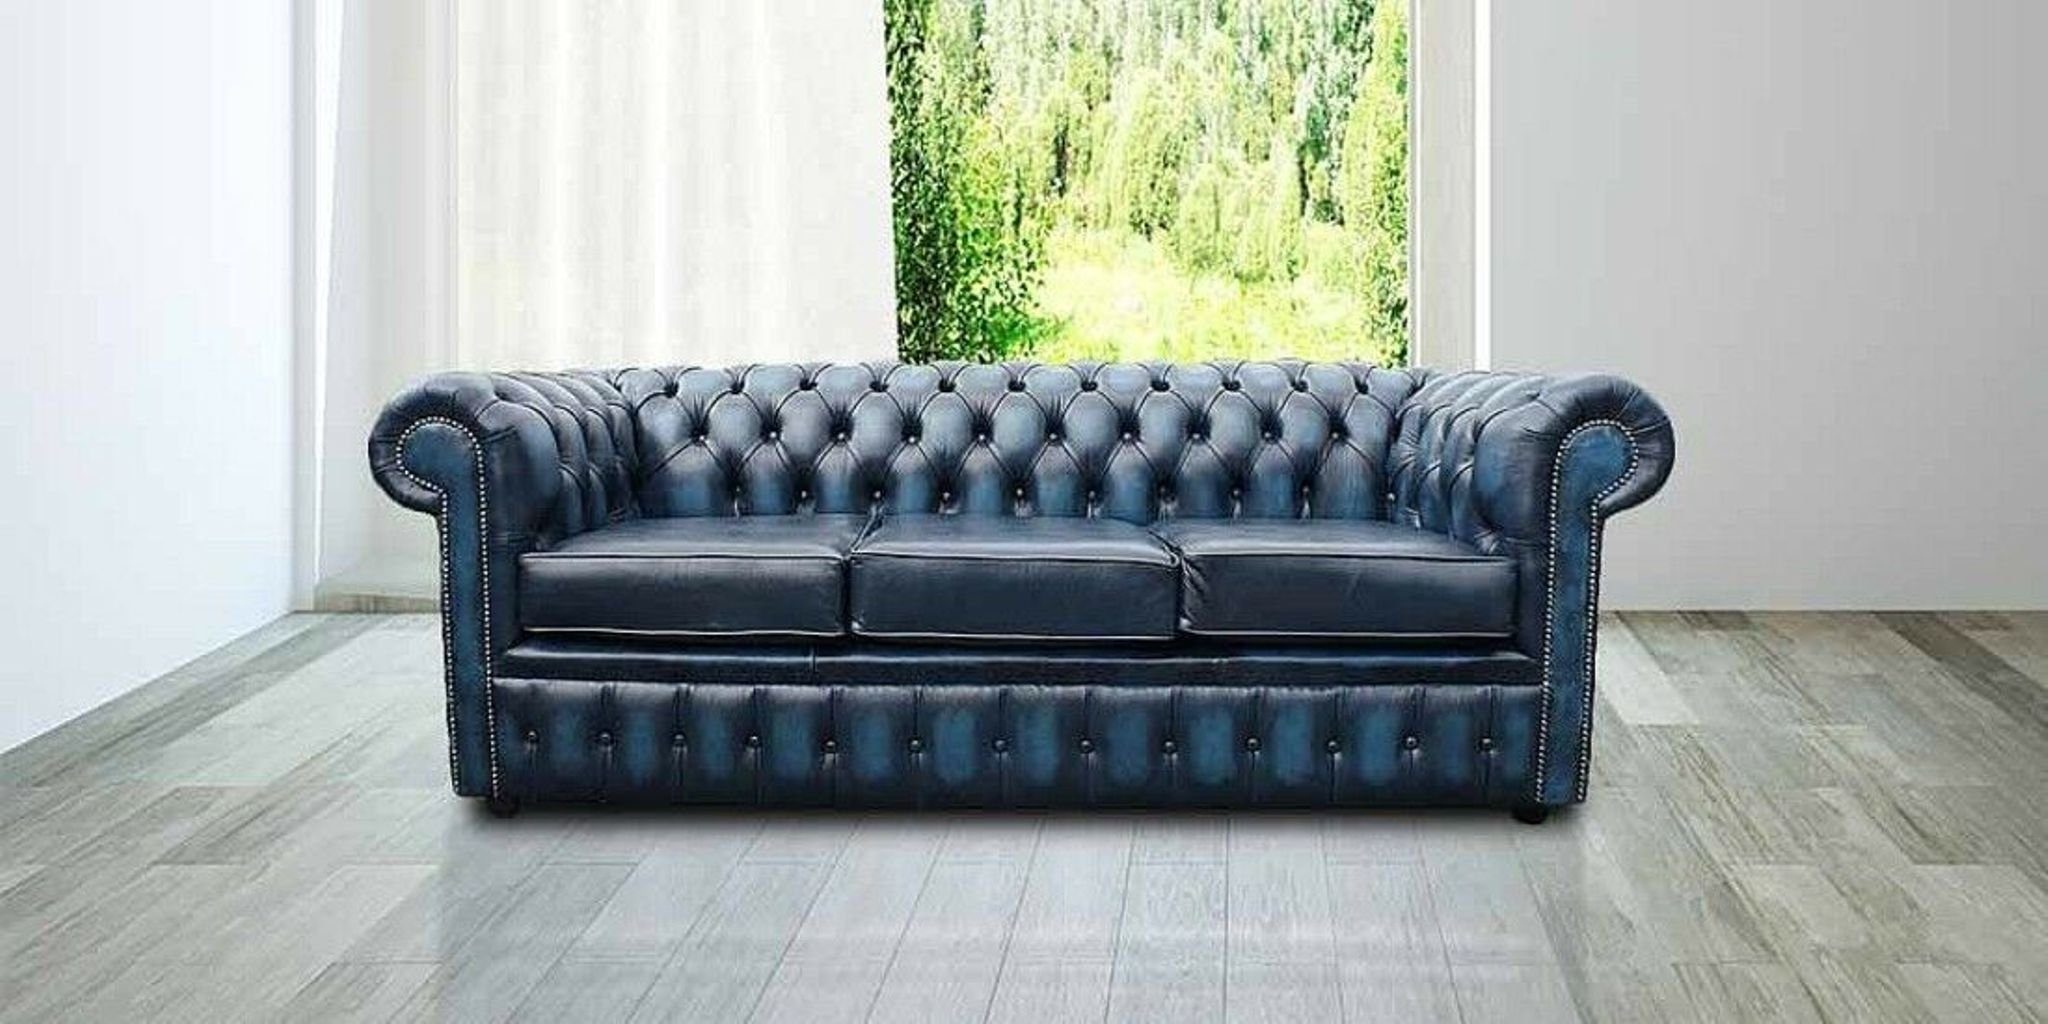 JVmoebel Chesterfield-Sofa, Chesterfield Design Luxus Polster Sofa Couch Sitz | Chesterfield-Sofas